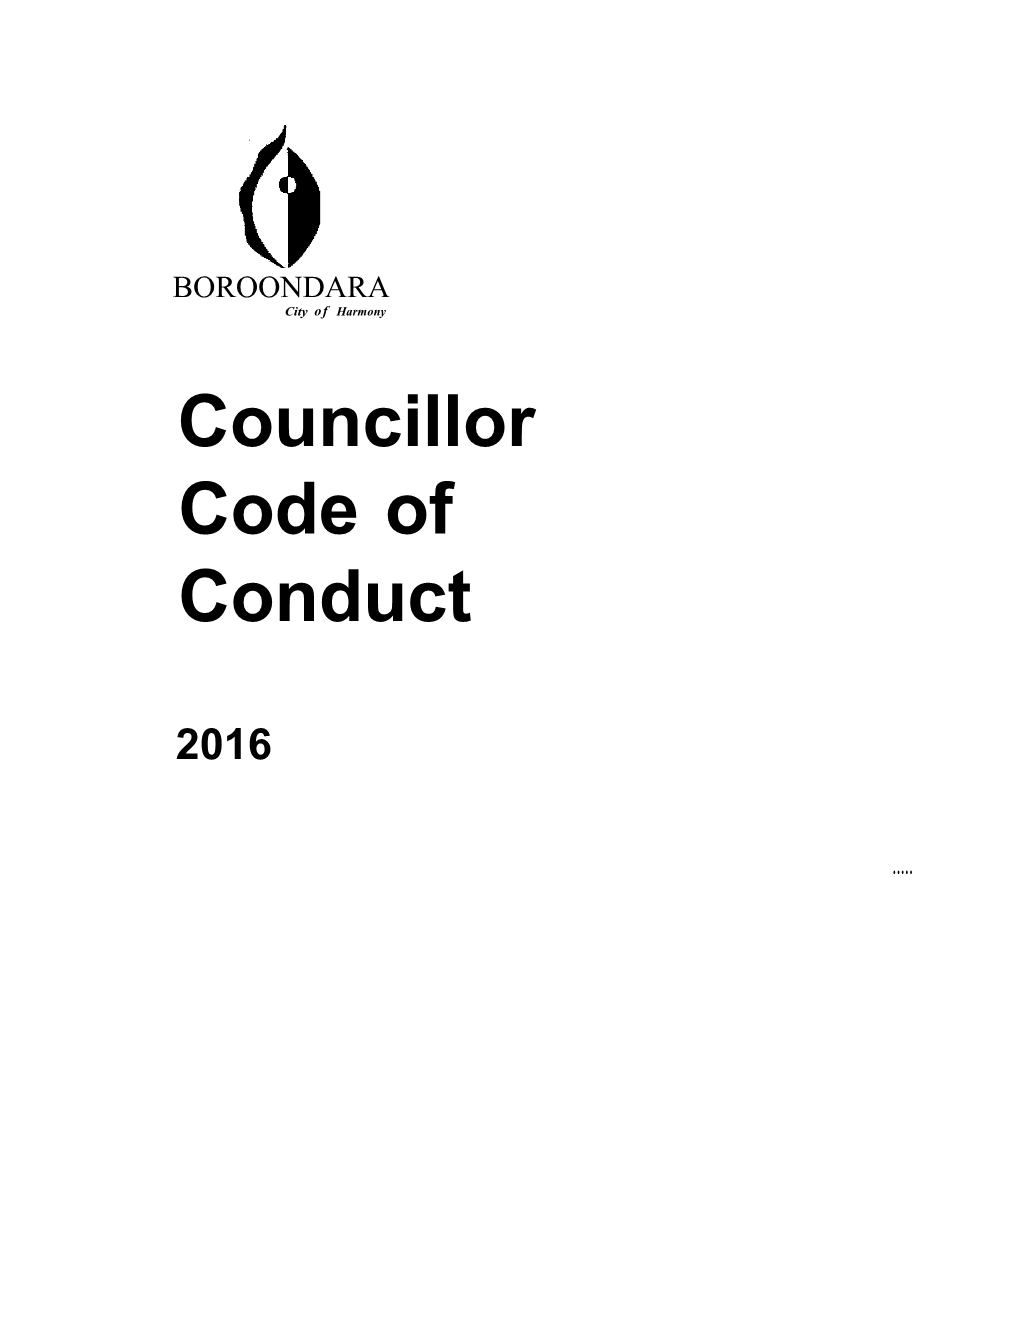 Responsibledirectorate: Chief Executiveofficeauthorisedby: Council